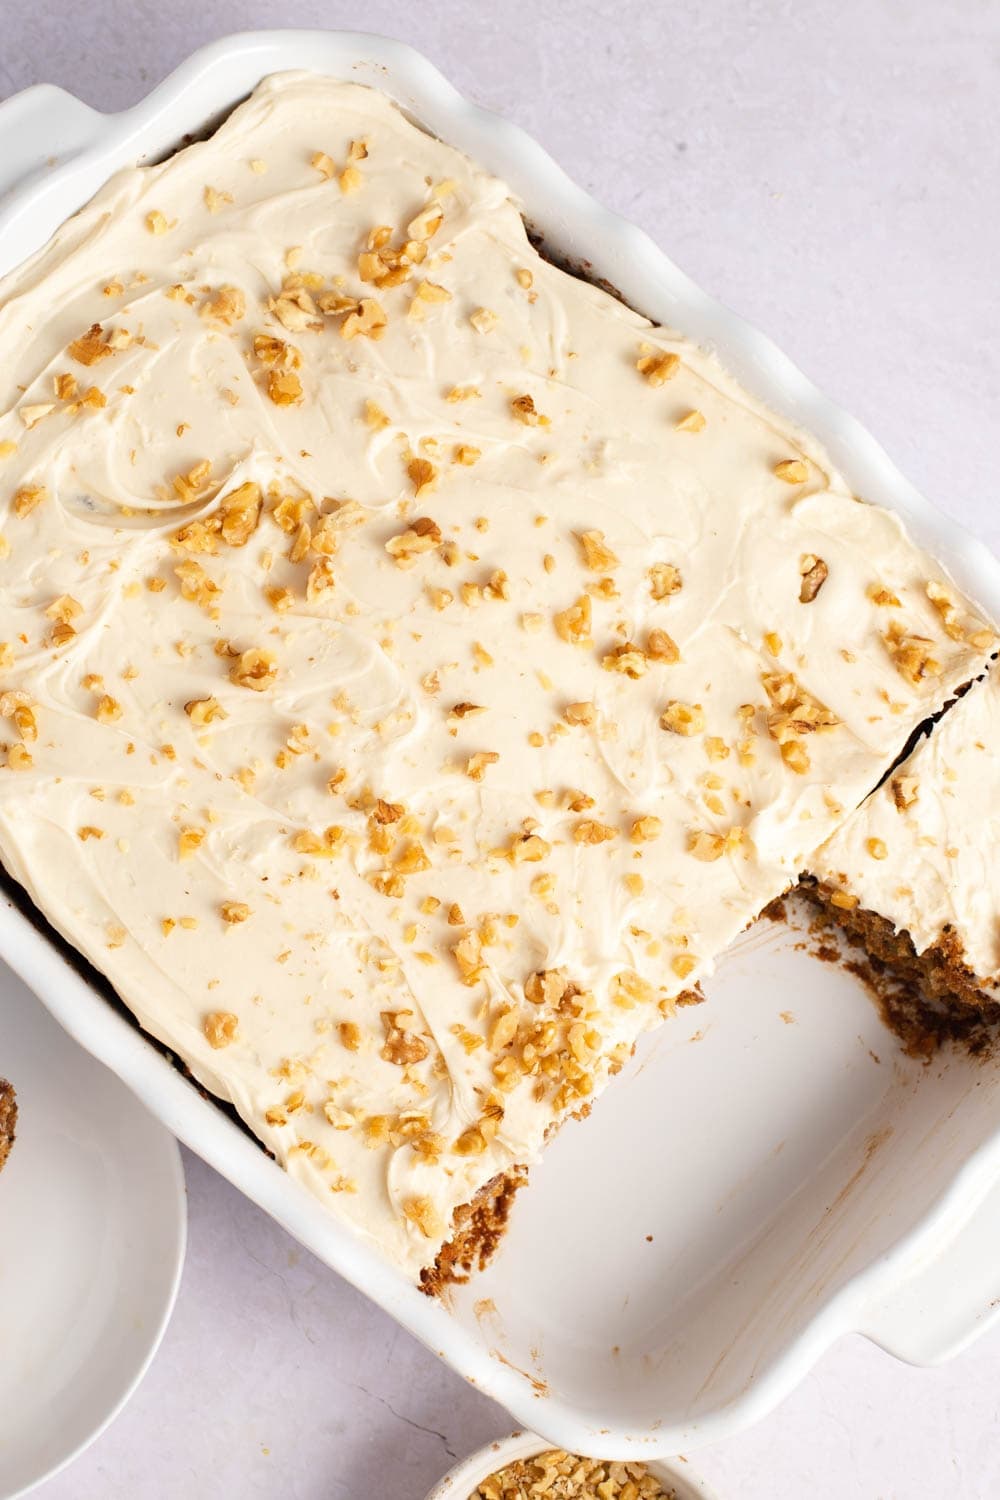 Homemade Moist Carrot Cake with Coconut and Walnuts